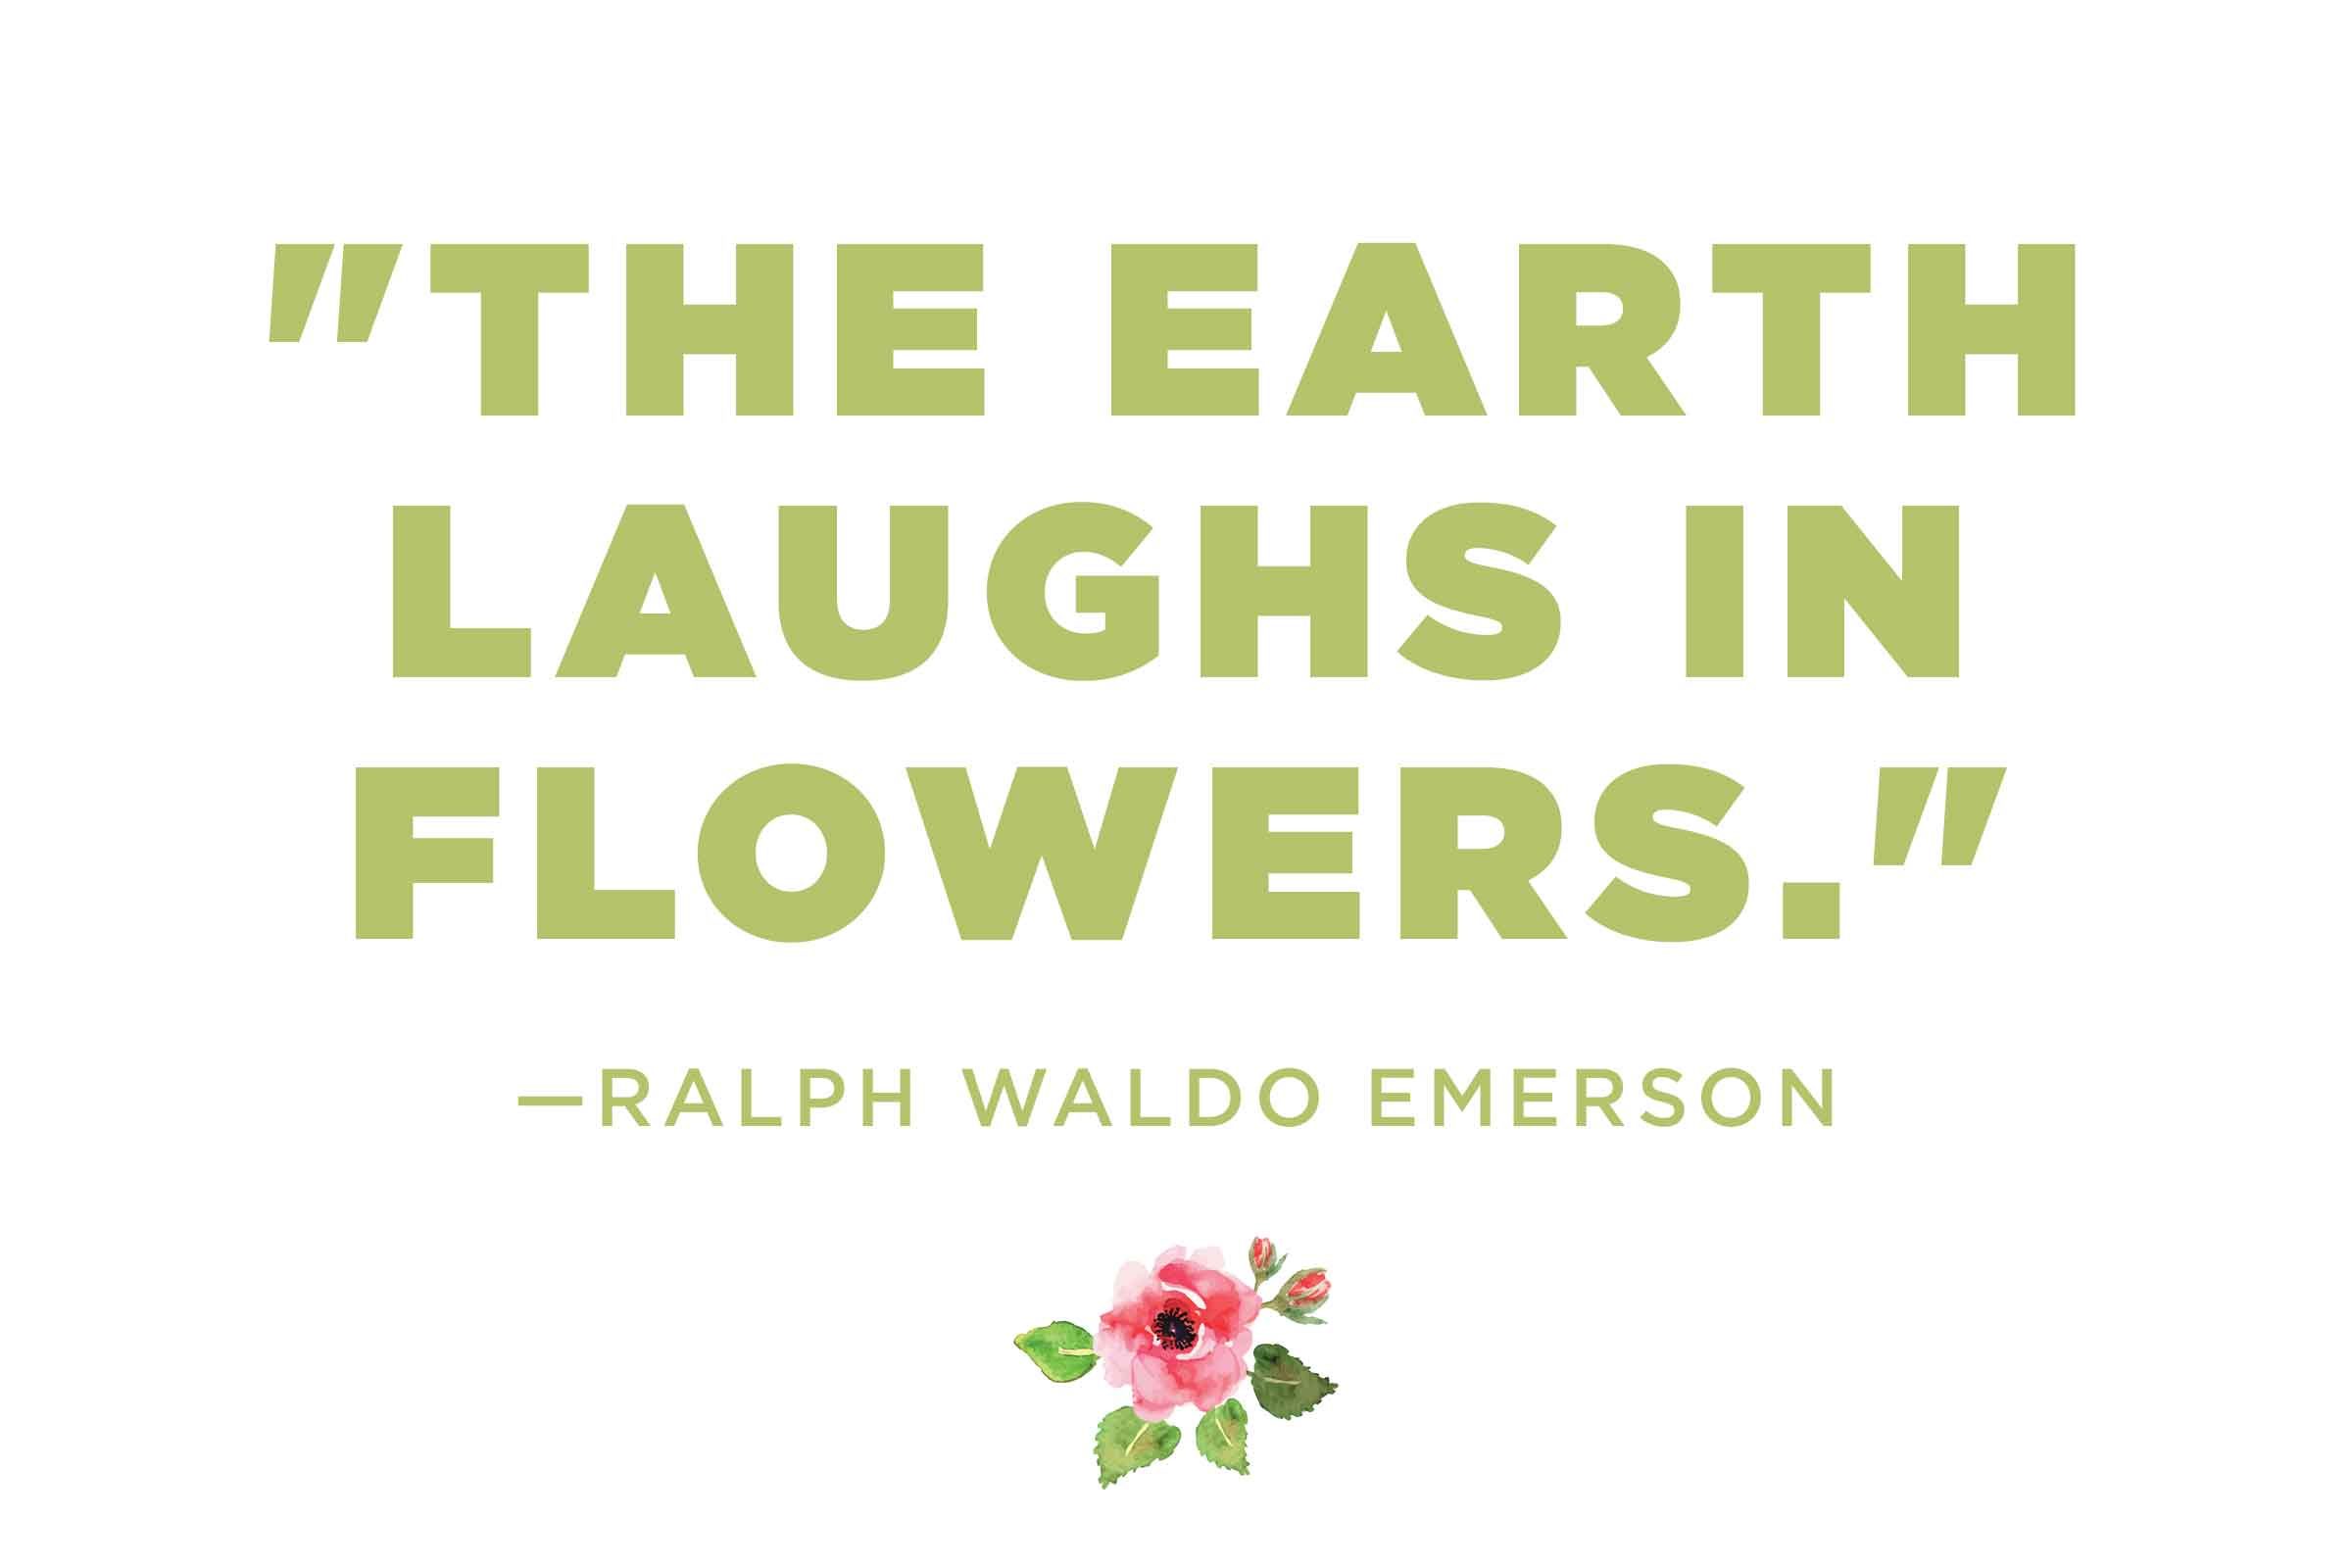 Flower Quotes: 12 Calming Thoughts on Flowers | Reader's Digest